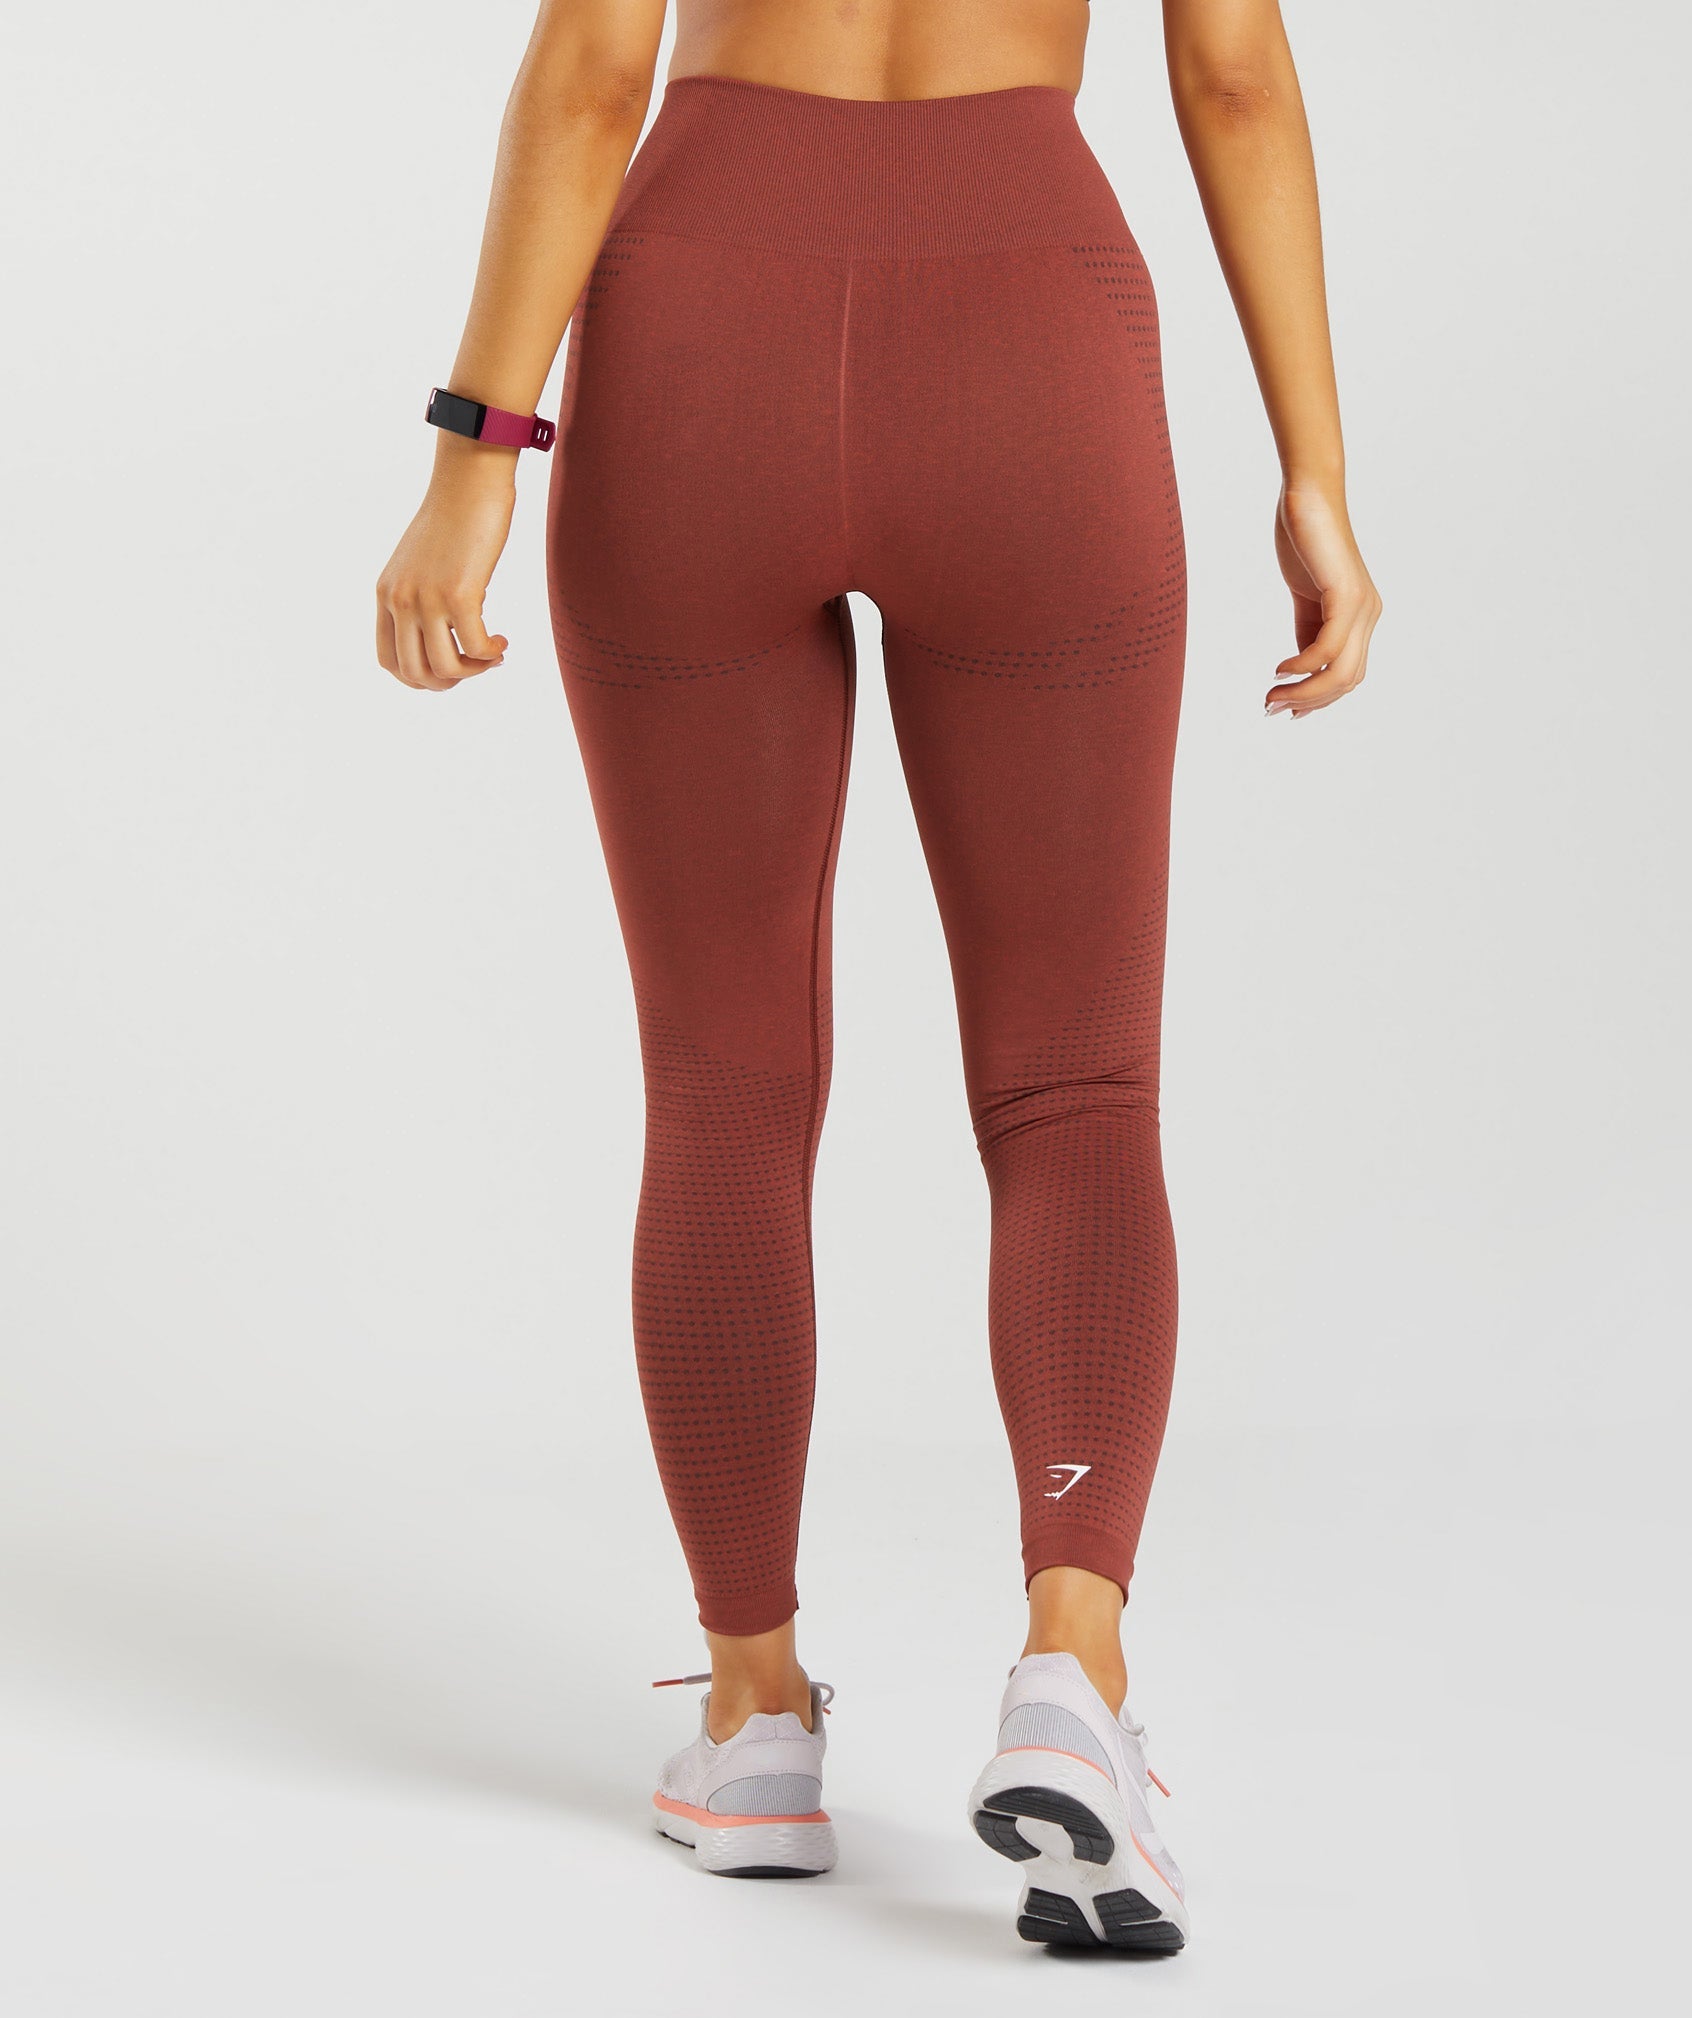 GYMSHARK LEGACY FITNESS Leggings - Moroccan Brick/White - Extra Small  £20.00 - PicClick UK